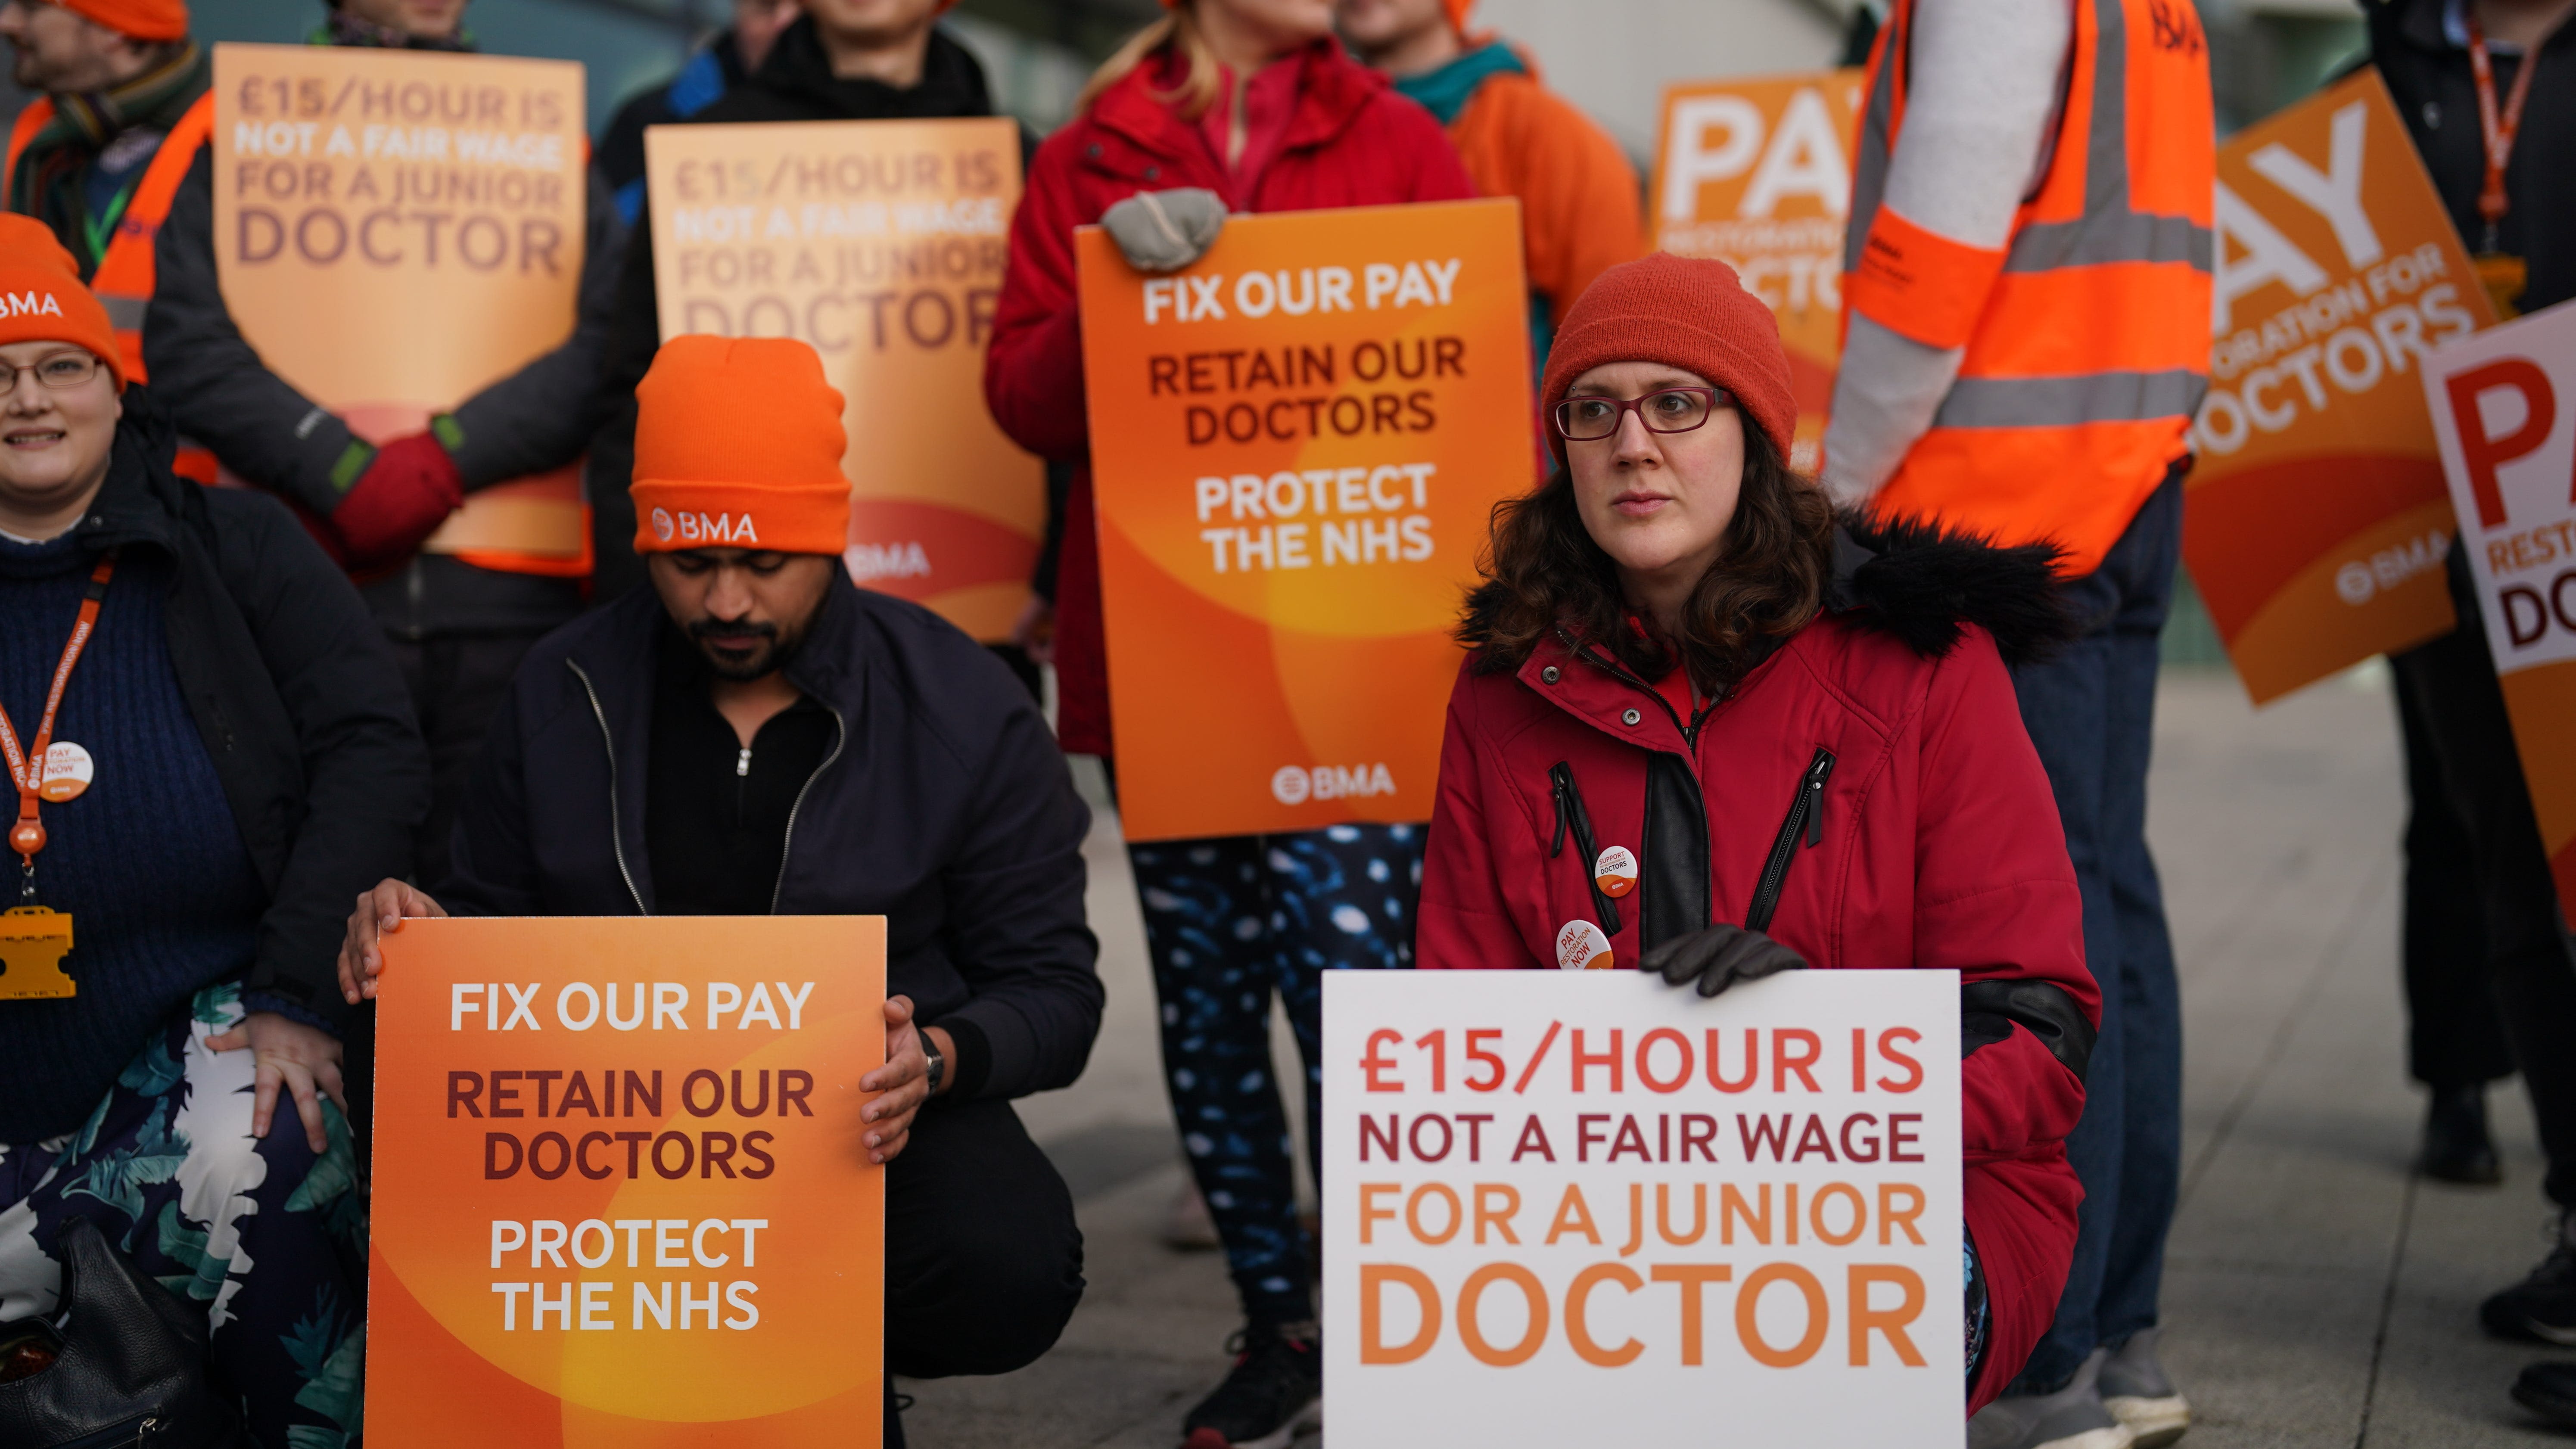 Junior doctors to stage pay strikes during election campaign